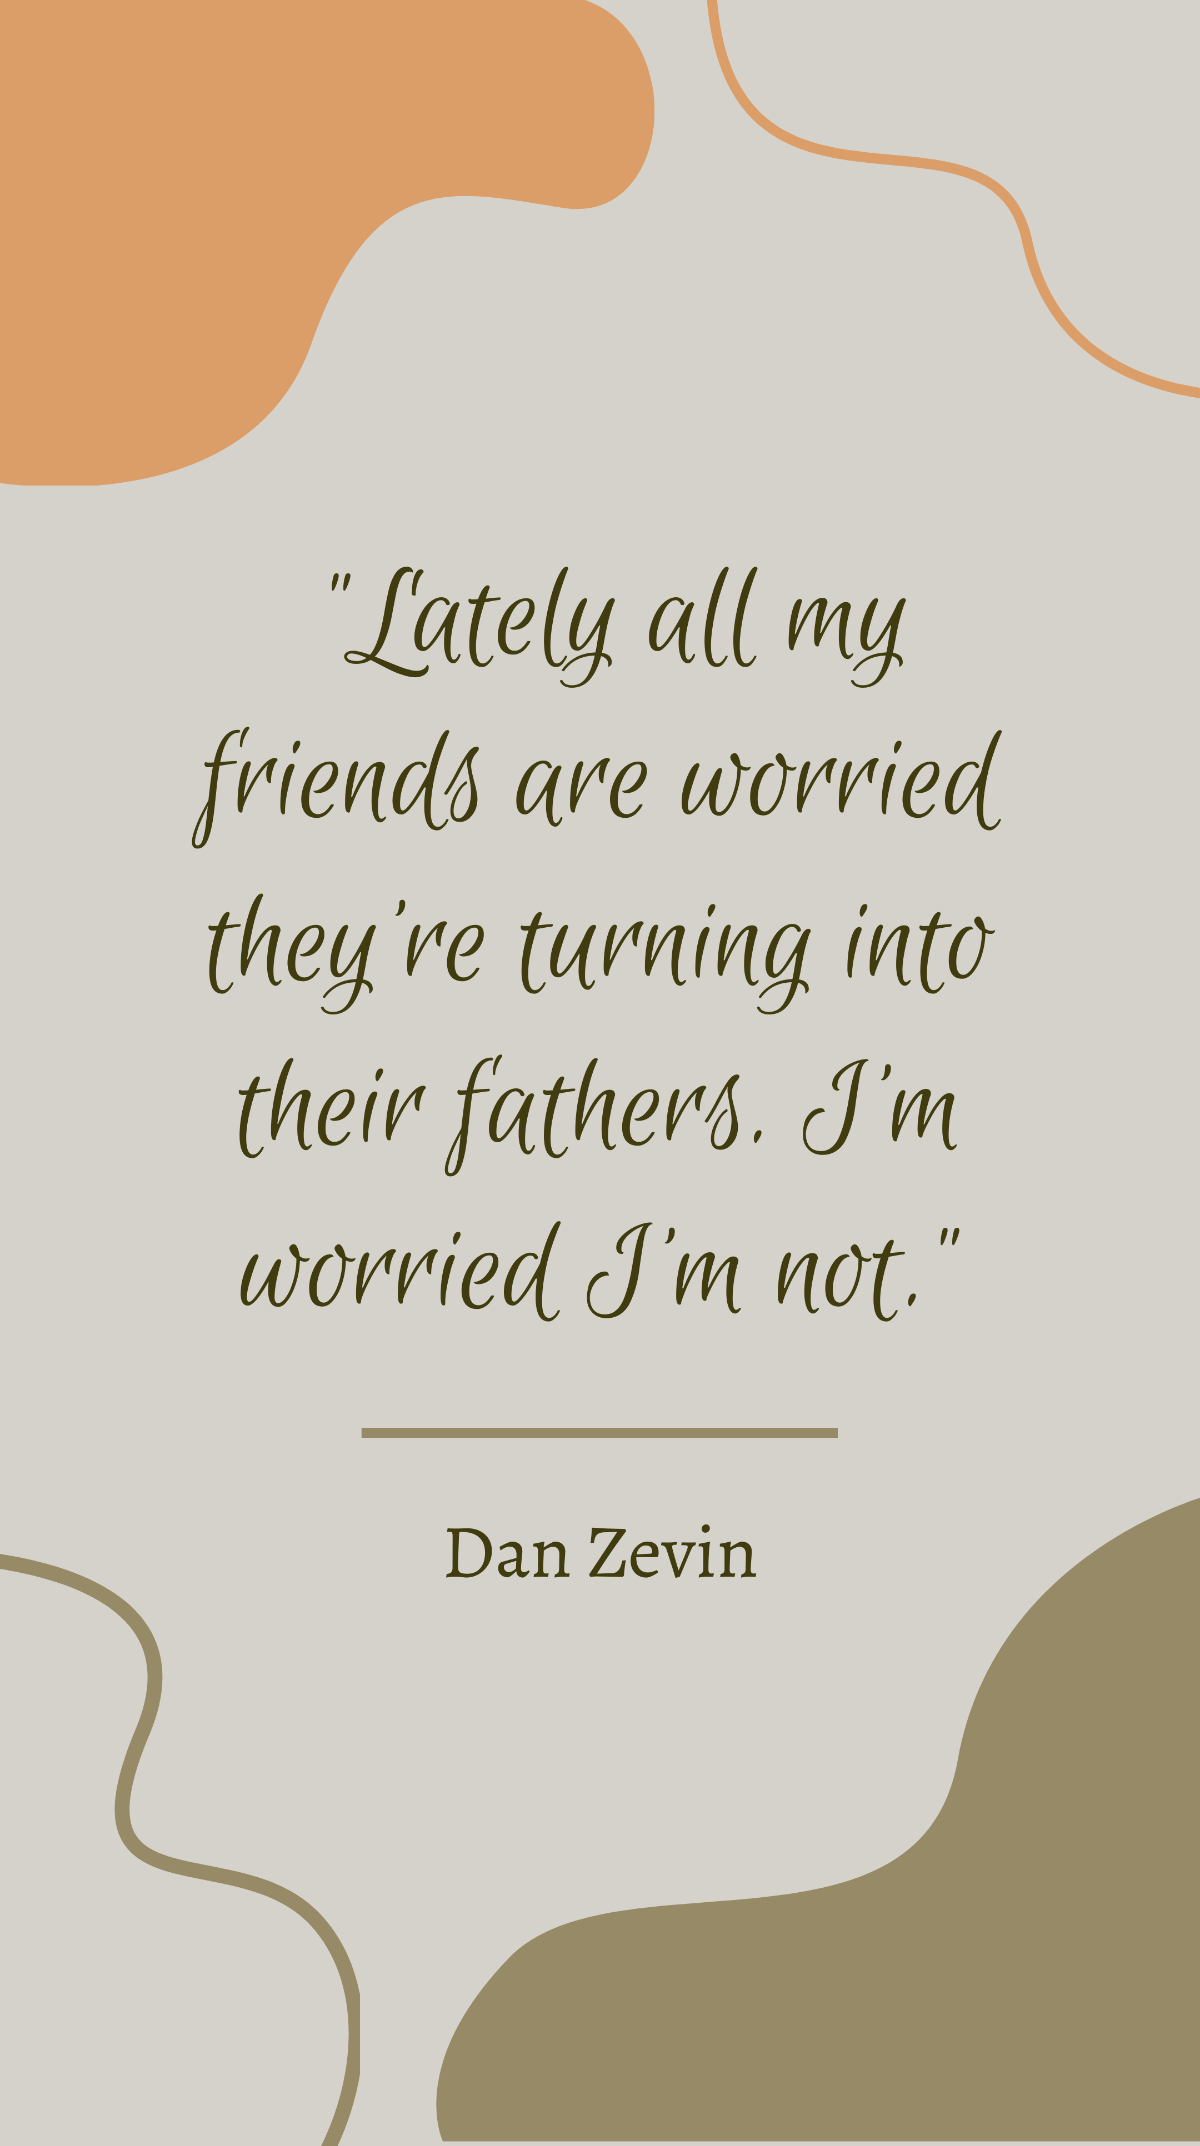  Dan Zevin - Lately all my friends are worried they’re turning into their fathers. I’m worried I’m not. Template